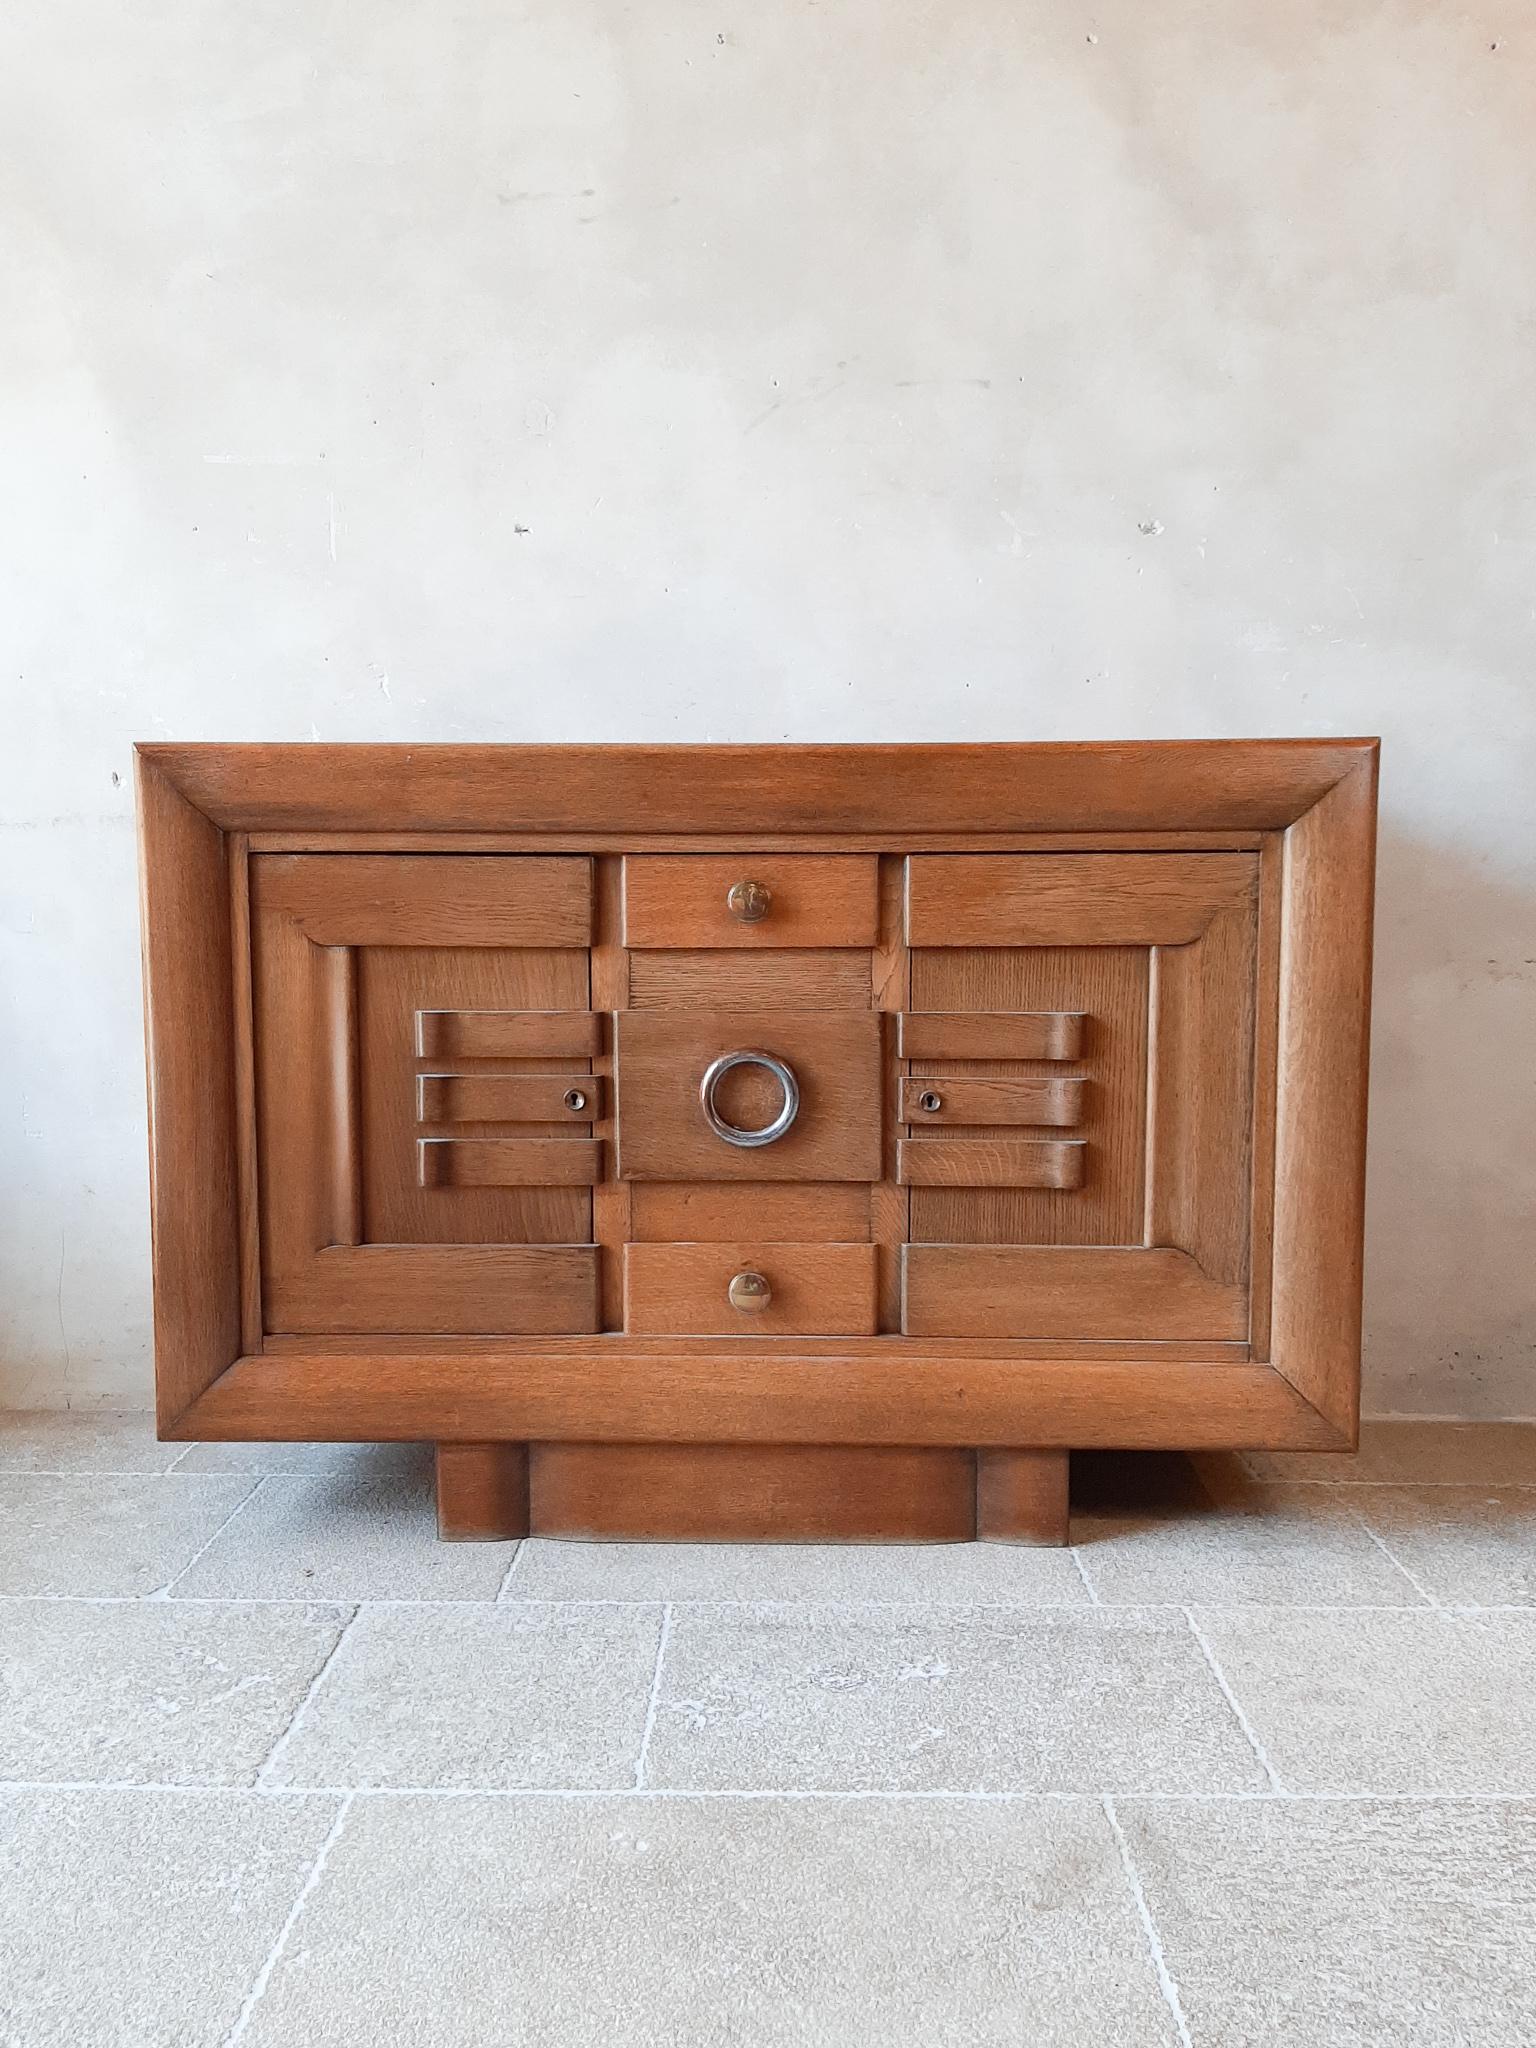 Midcentury sideboard, credenza by Charles Dudouyt in blond oak, vintage design 1930s. The cabinet features 2 large doors on each side, and 3 draers in the middle. The doors and drawers have a stunning Art-Deco design, and show great craftmanship.